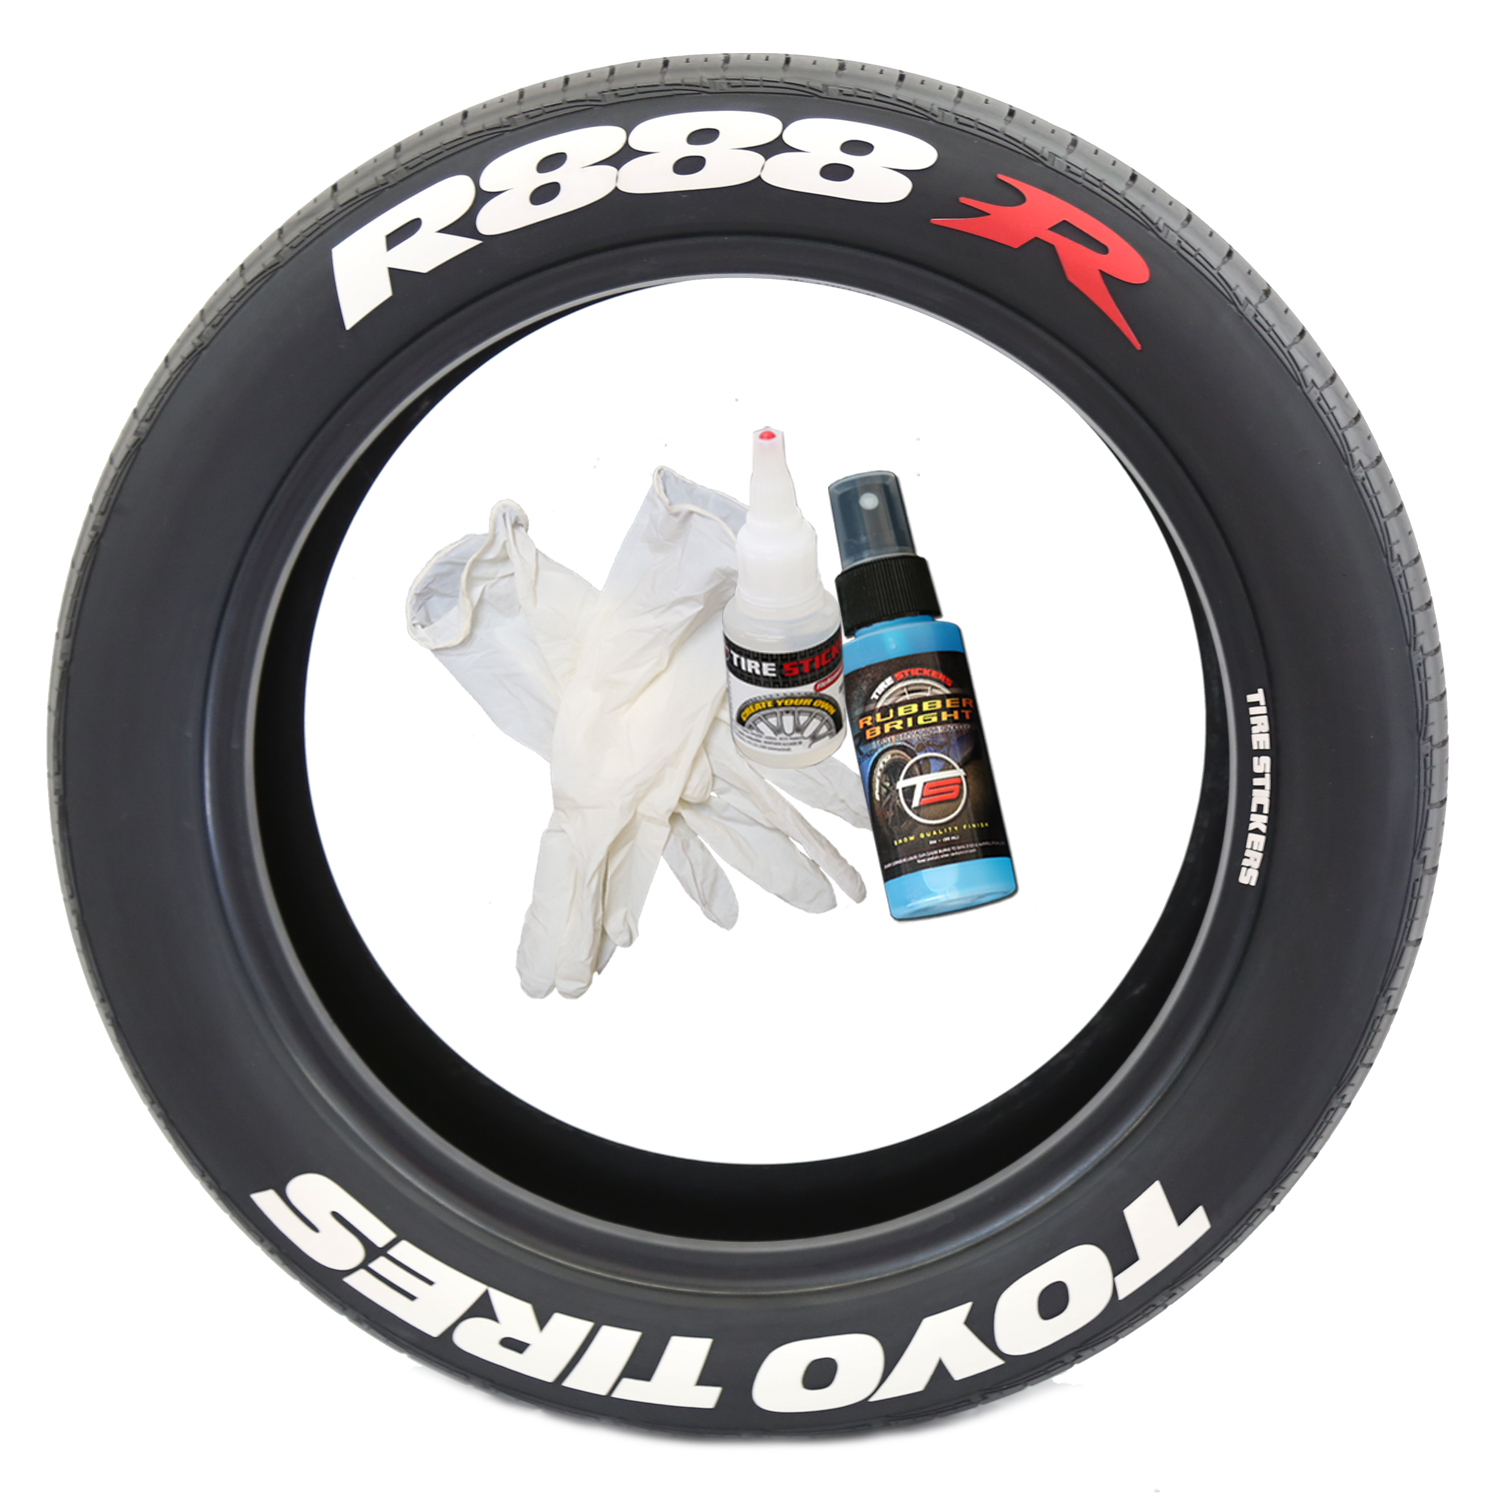 R And R Tires Near Me - change comin